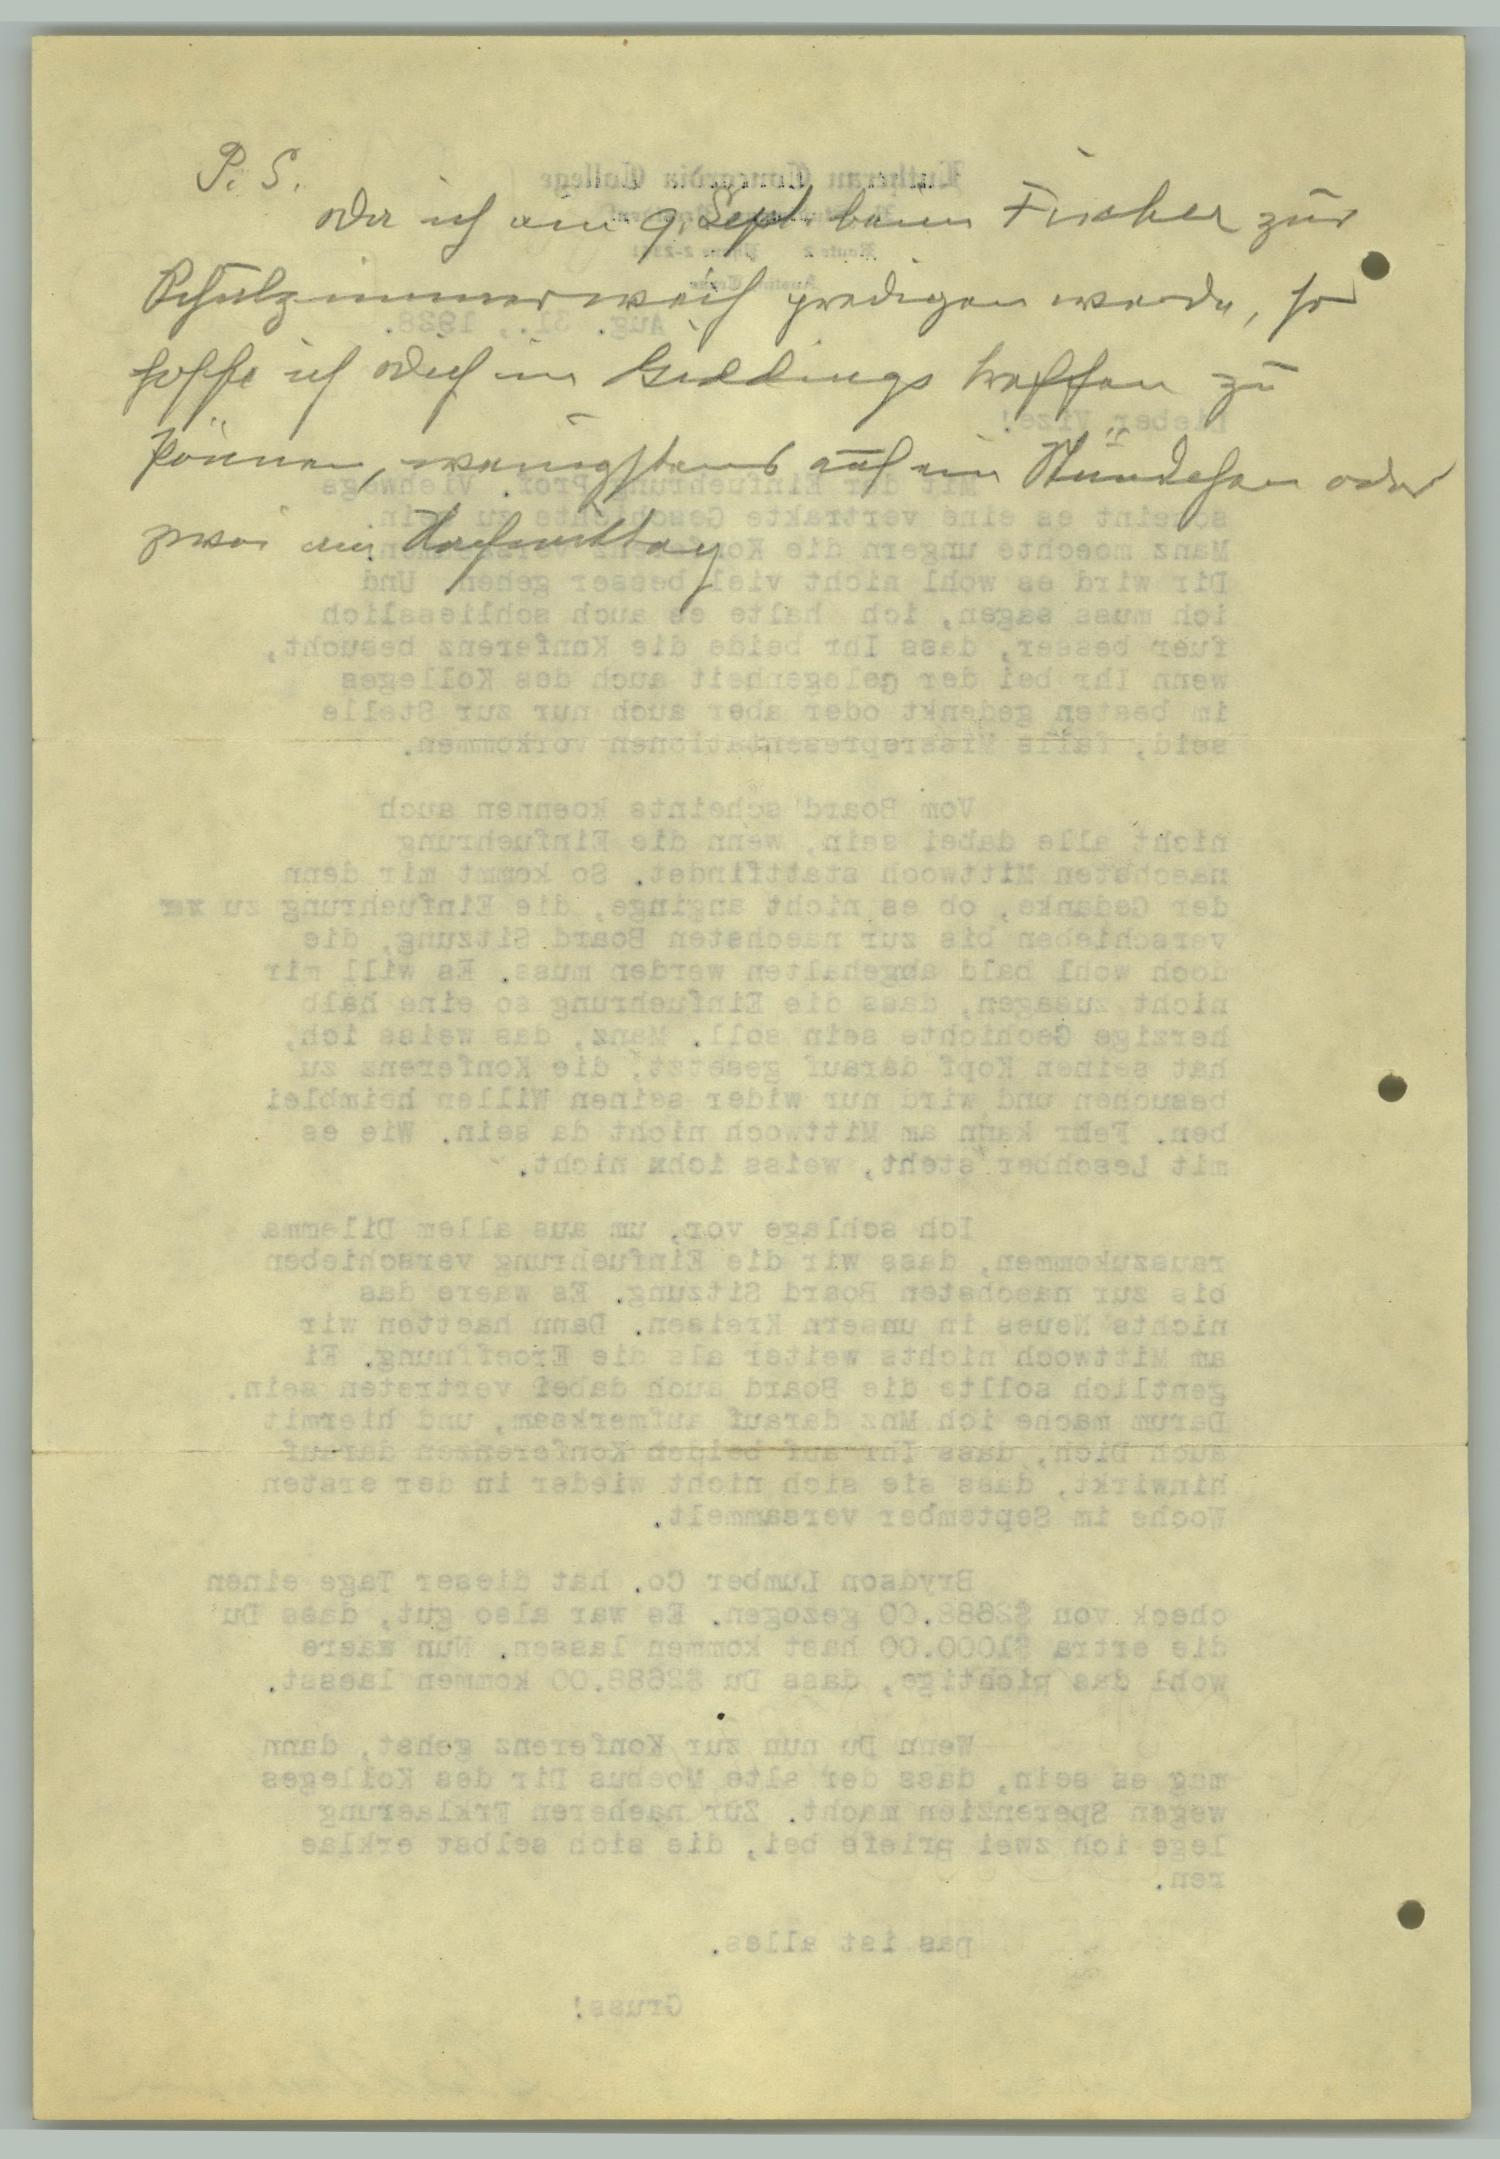 [Letter from H. Studtmann to "Vize", August 31, 1928]
                                                
                                                    [Sequence #]: 2 of 2
                                                